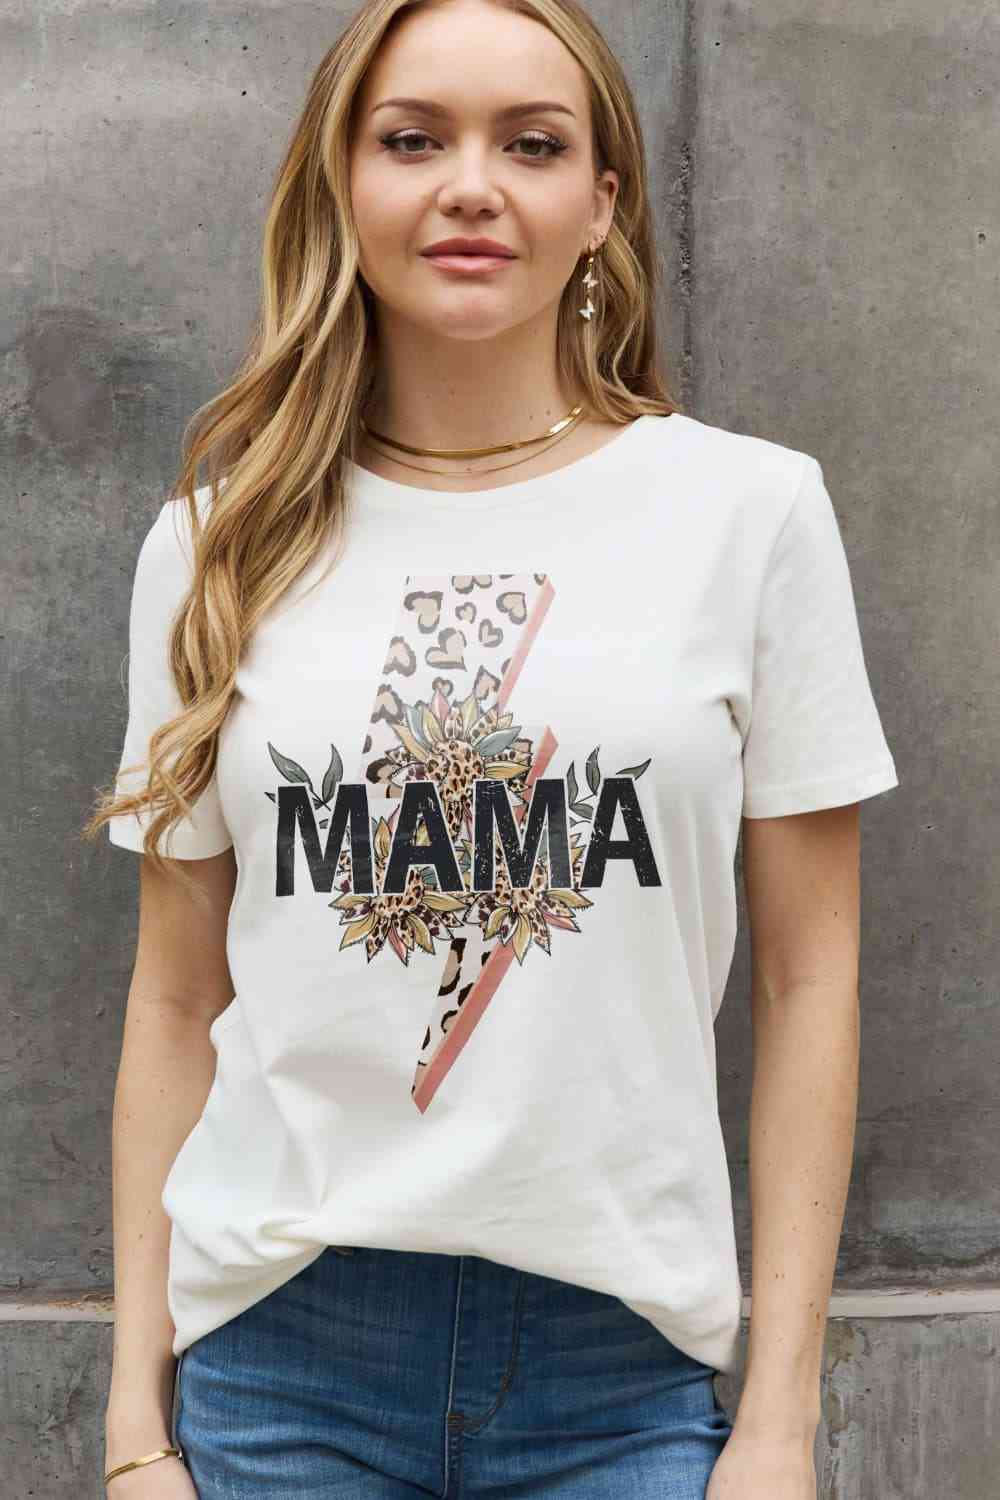 MAMA Graphic Cotton Tee - Kawaii Stop - C-Star, Comfortable, Fashion, Graphic Pattern, Hand Wash, High-Waisted Jeans, Motherhood, Must-Have, Proud Mama, Ship From Overseas, Simply Love, Slightly Stretchy, Sneakers, Statement Necklace, T-Shirt, Women's Clothing